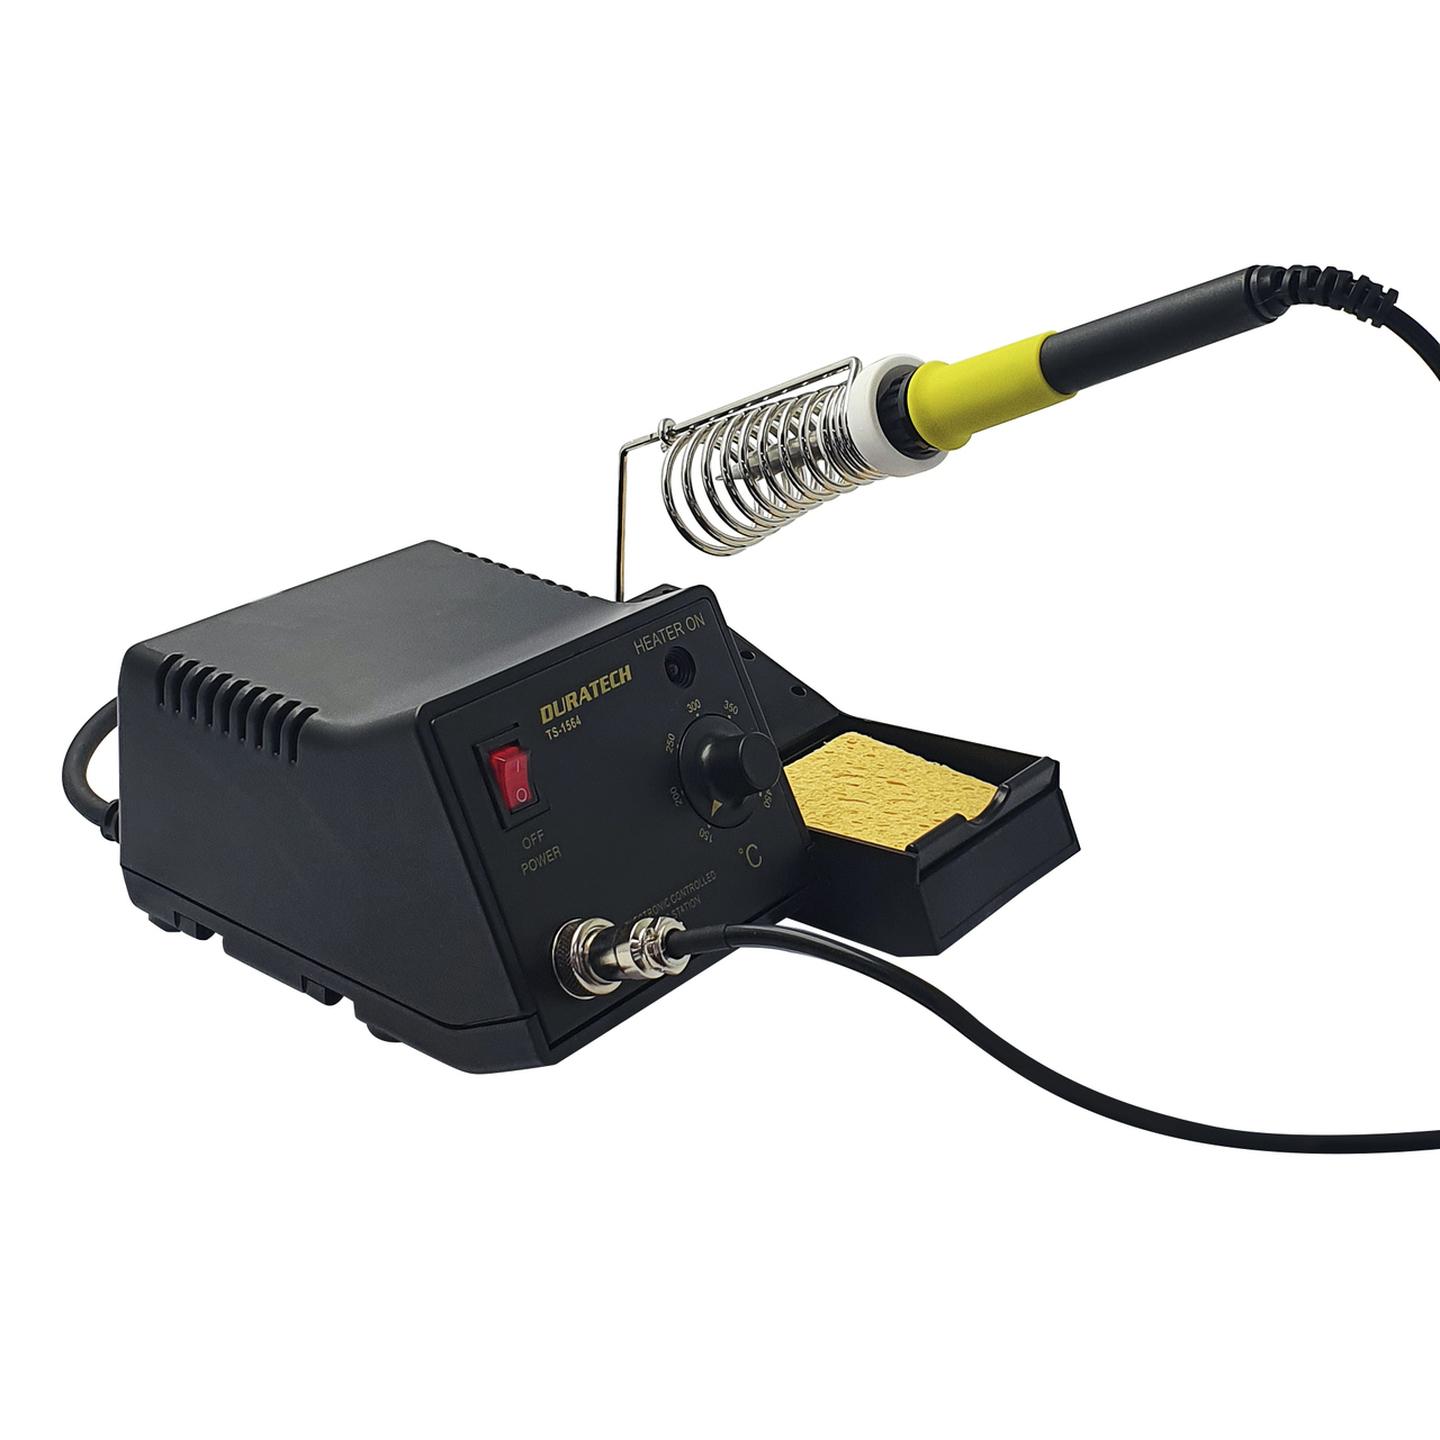 48W Temperature Controlled Soldering Station